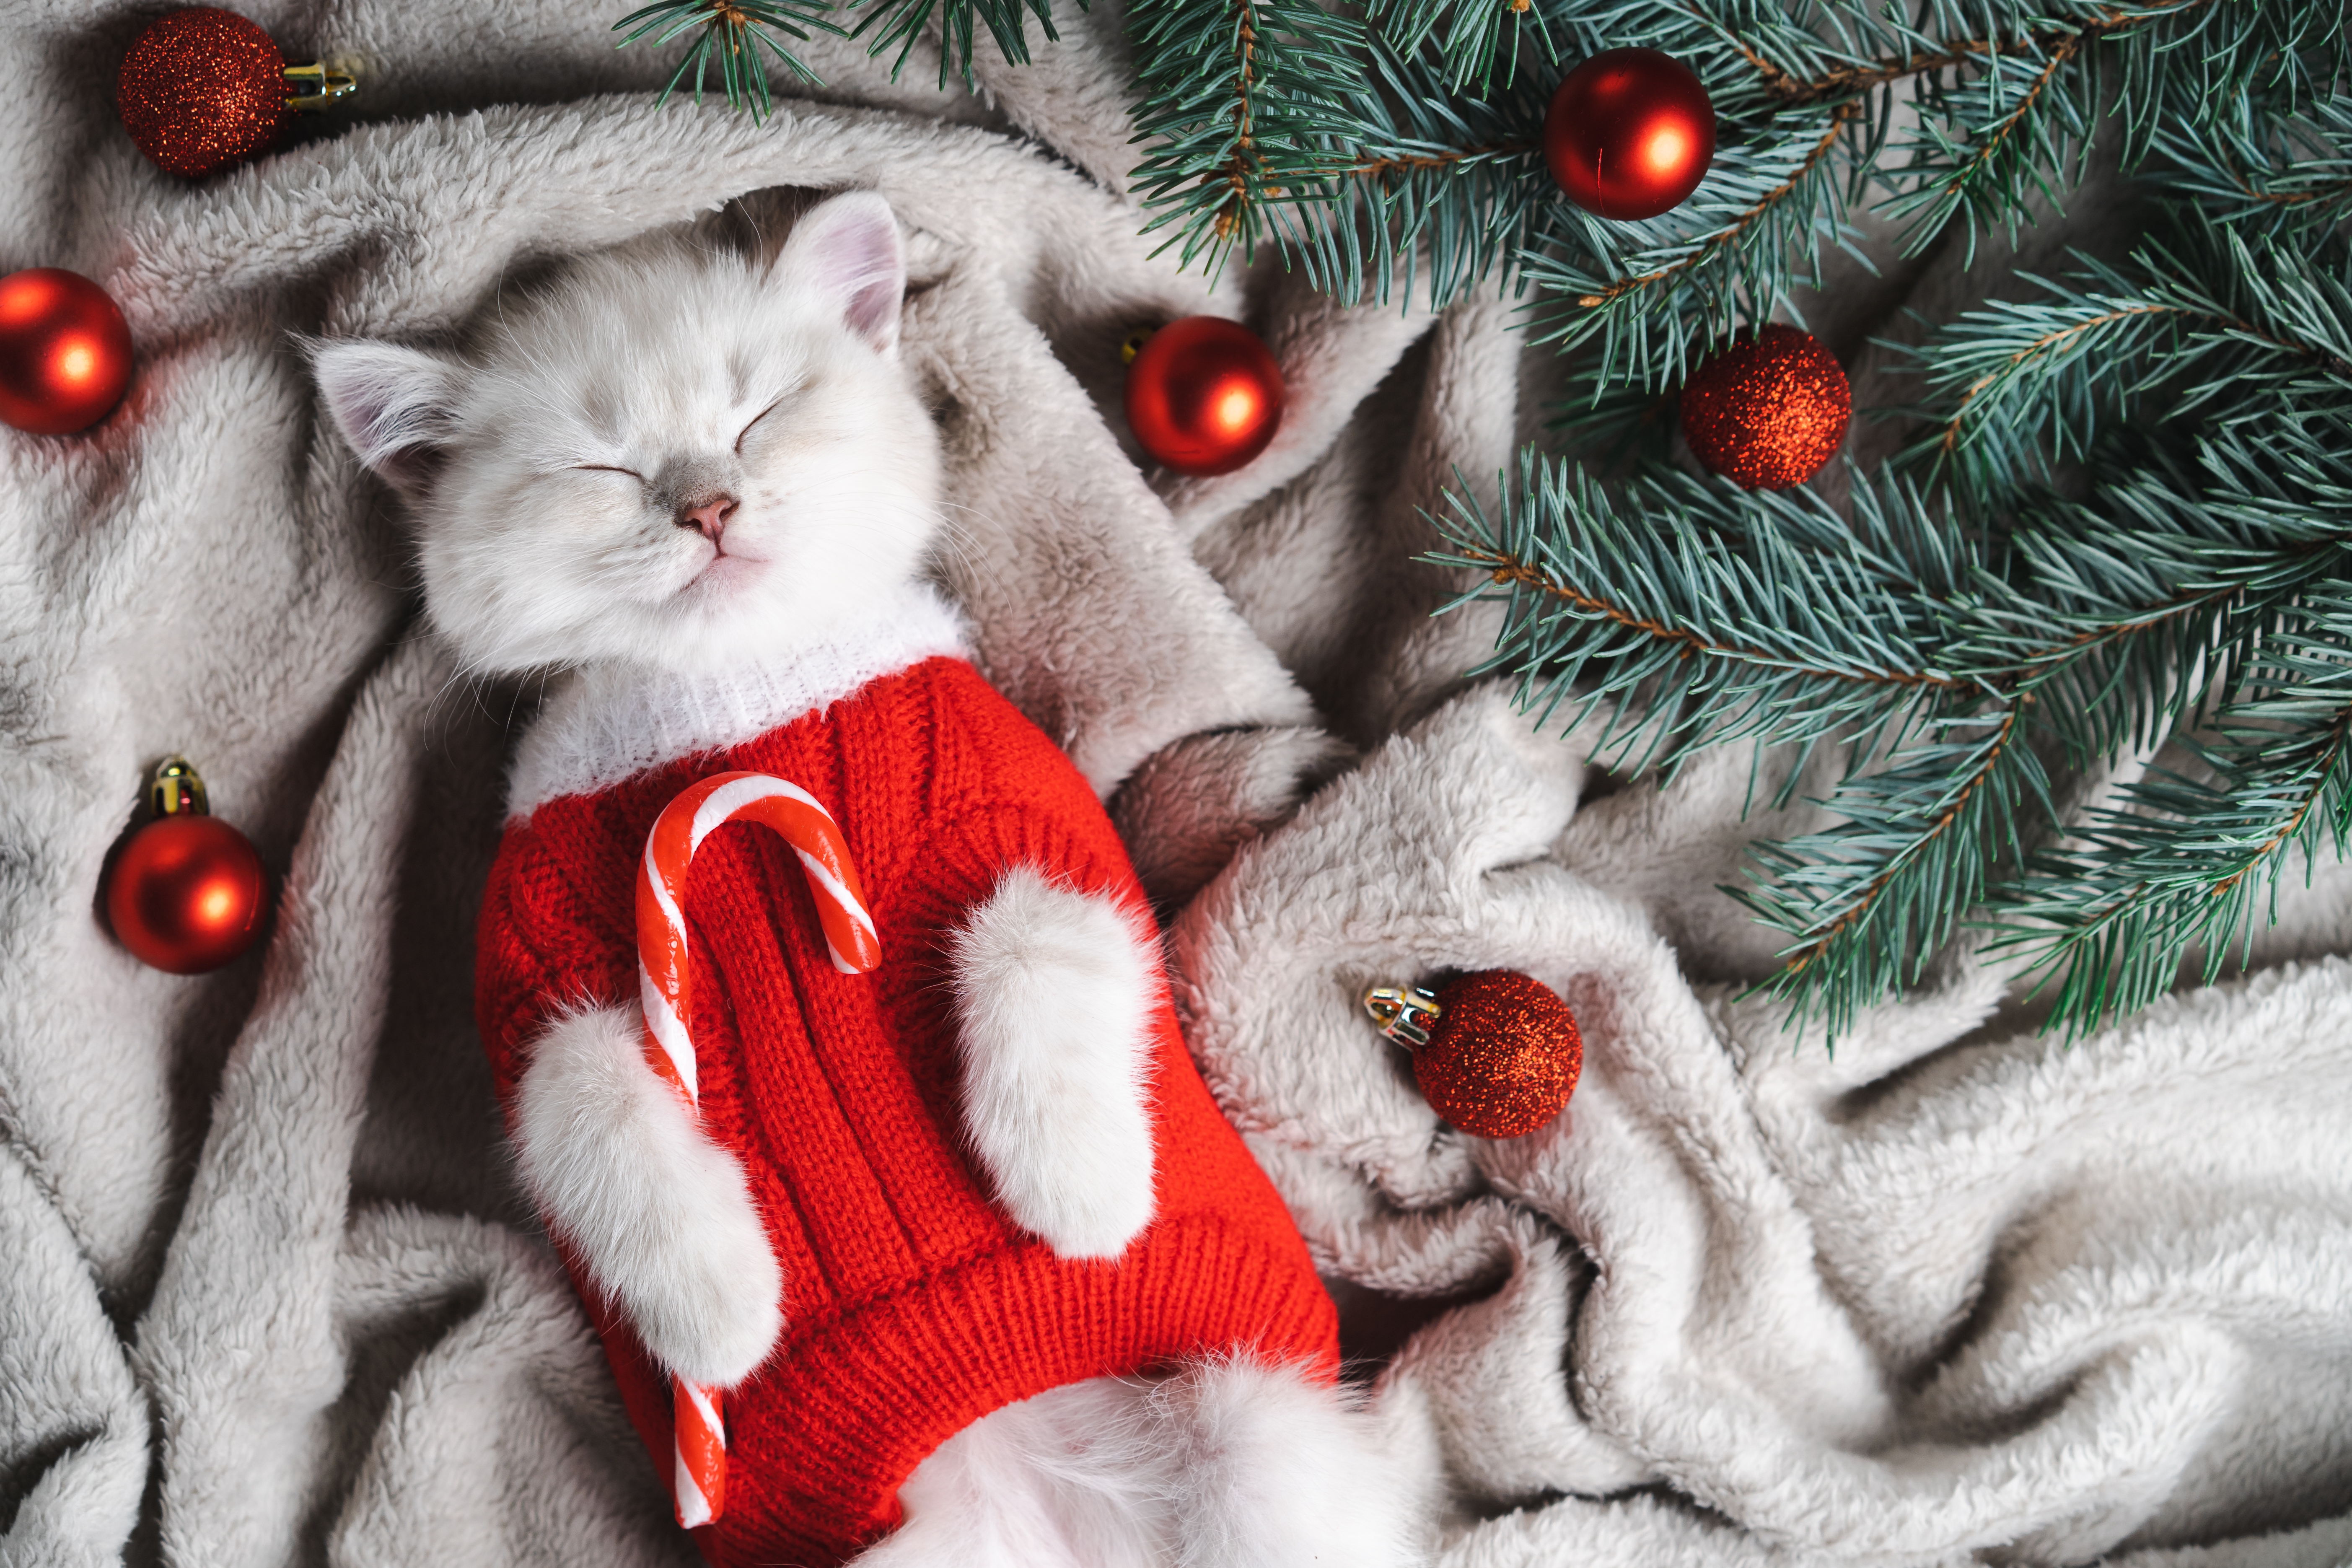 An adorable Christmas cat wearing a red sweater lies down on a gray blanket with her eyes closed | Source: Shutterstock